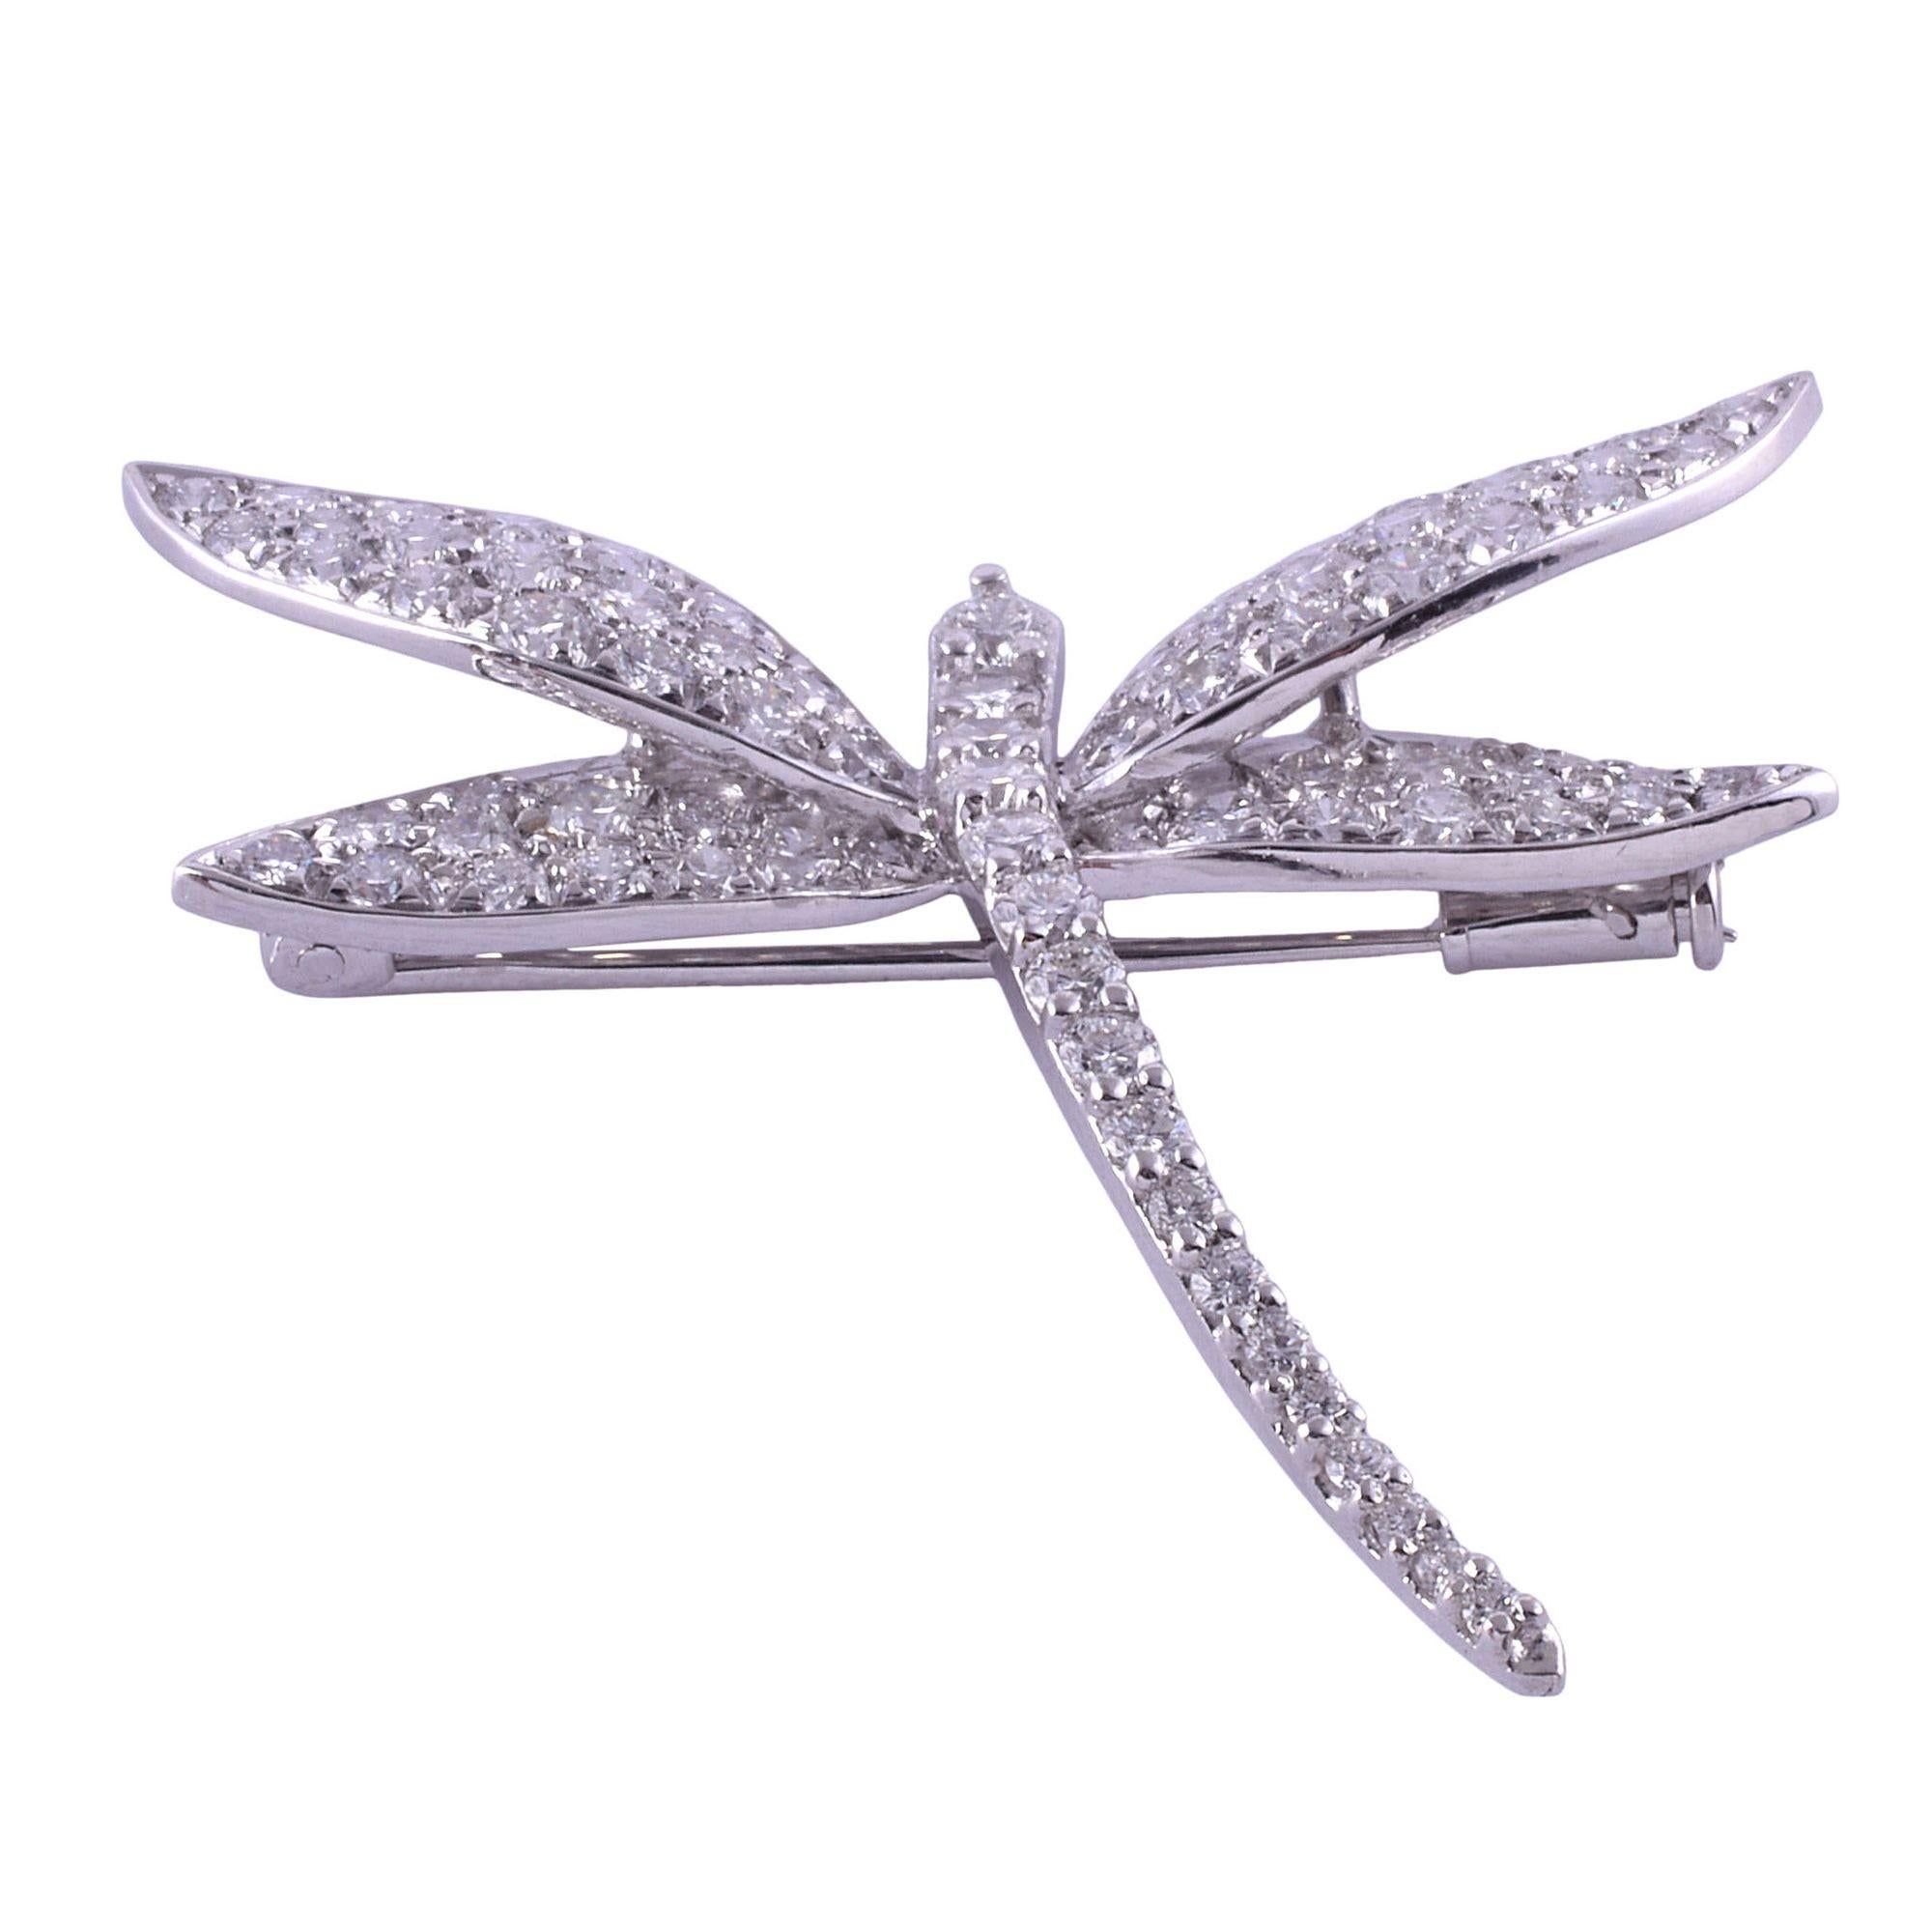 Estate pave diamond dragonfly brooch. This estate dragonfly brooch is crafted in 18 karat gold with rhodium plating. There are 79 full cut diamonds at 2.20 carat total weight having VS1-2 clarity and H-J color. The white gold diamond dragonfly pin